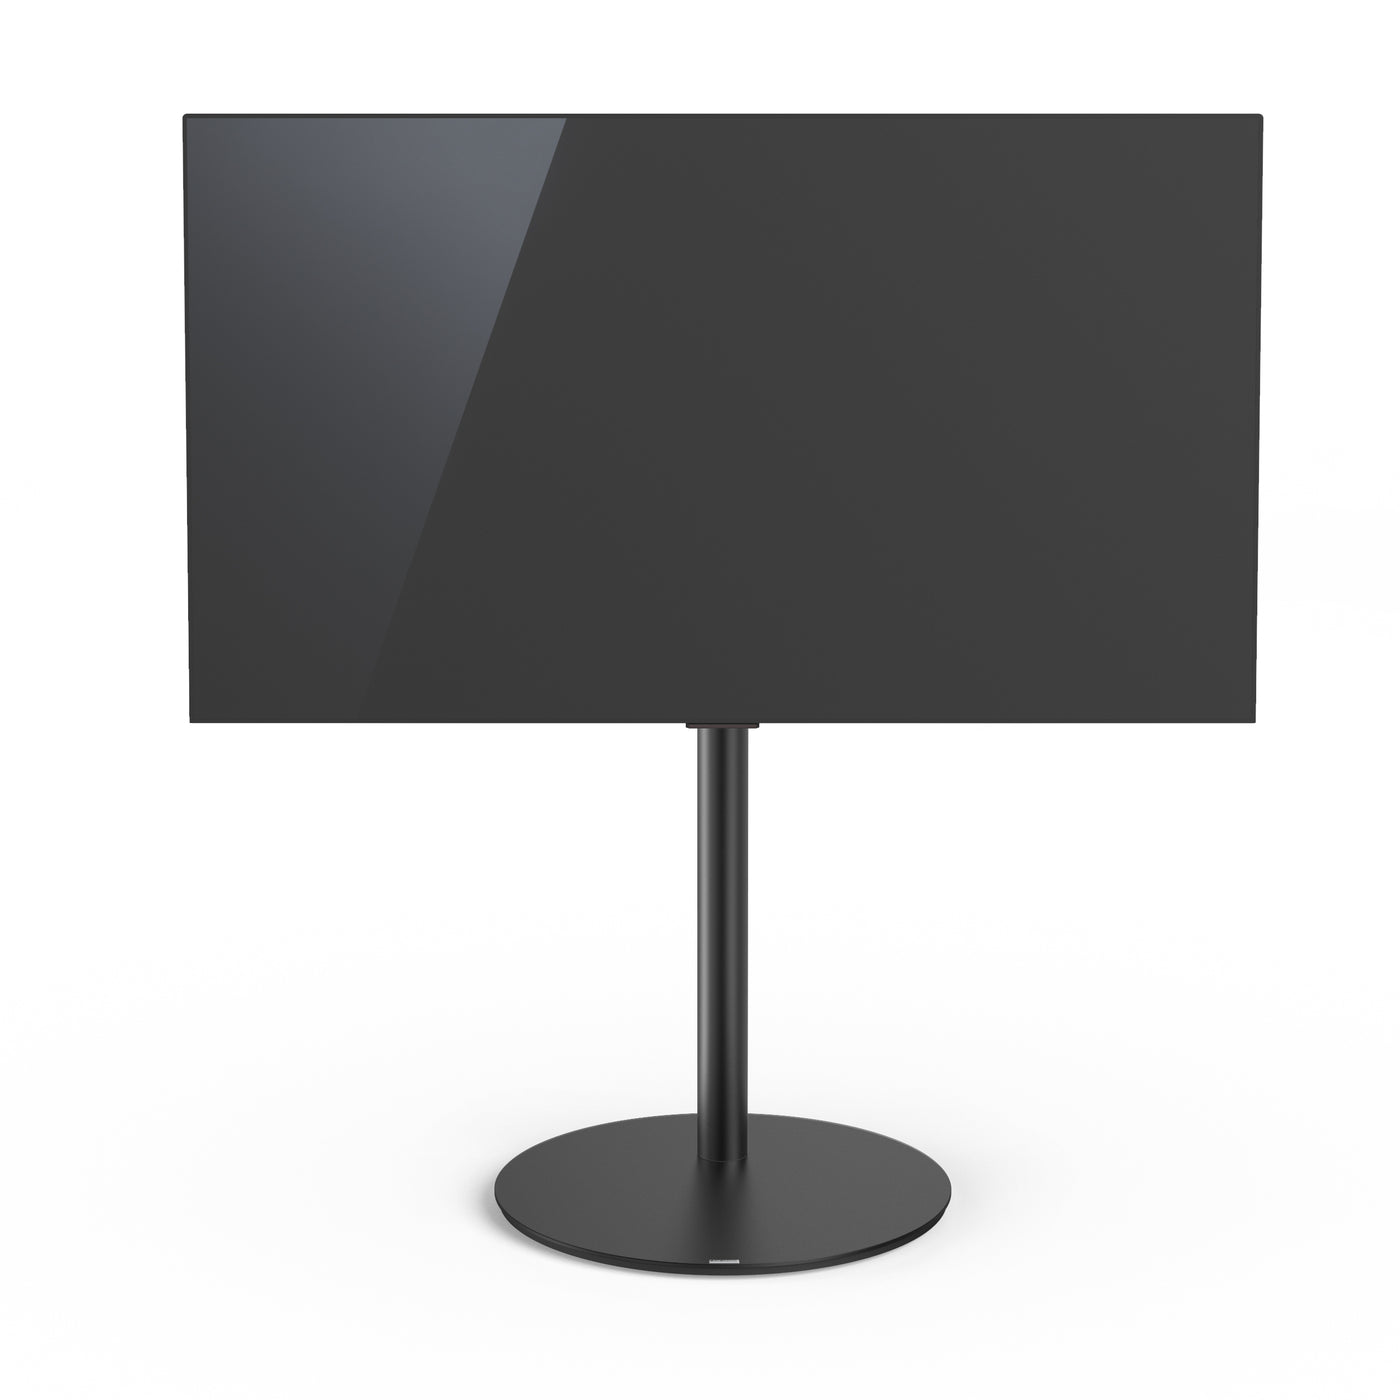 Spectral Circle VX1000 Rotating TV Stand | Front View | Satin Black | Holburn Online